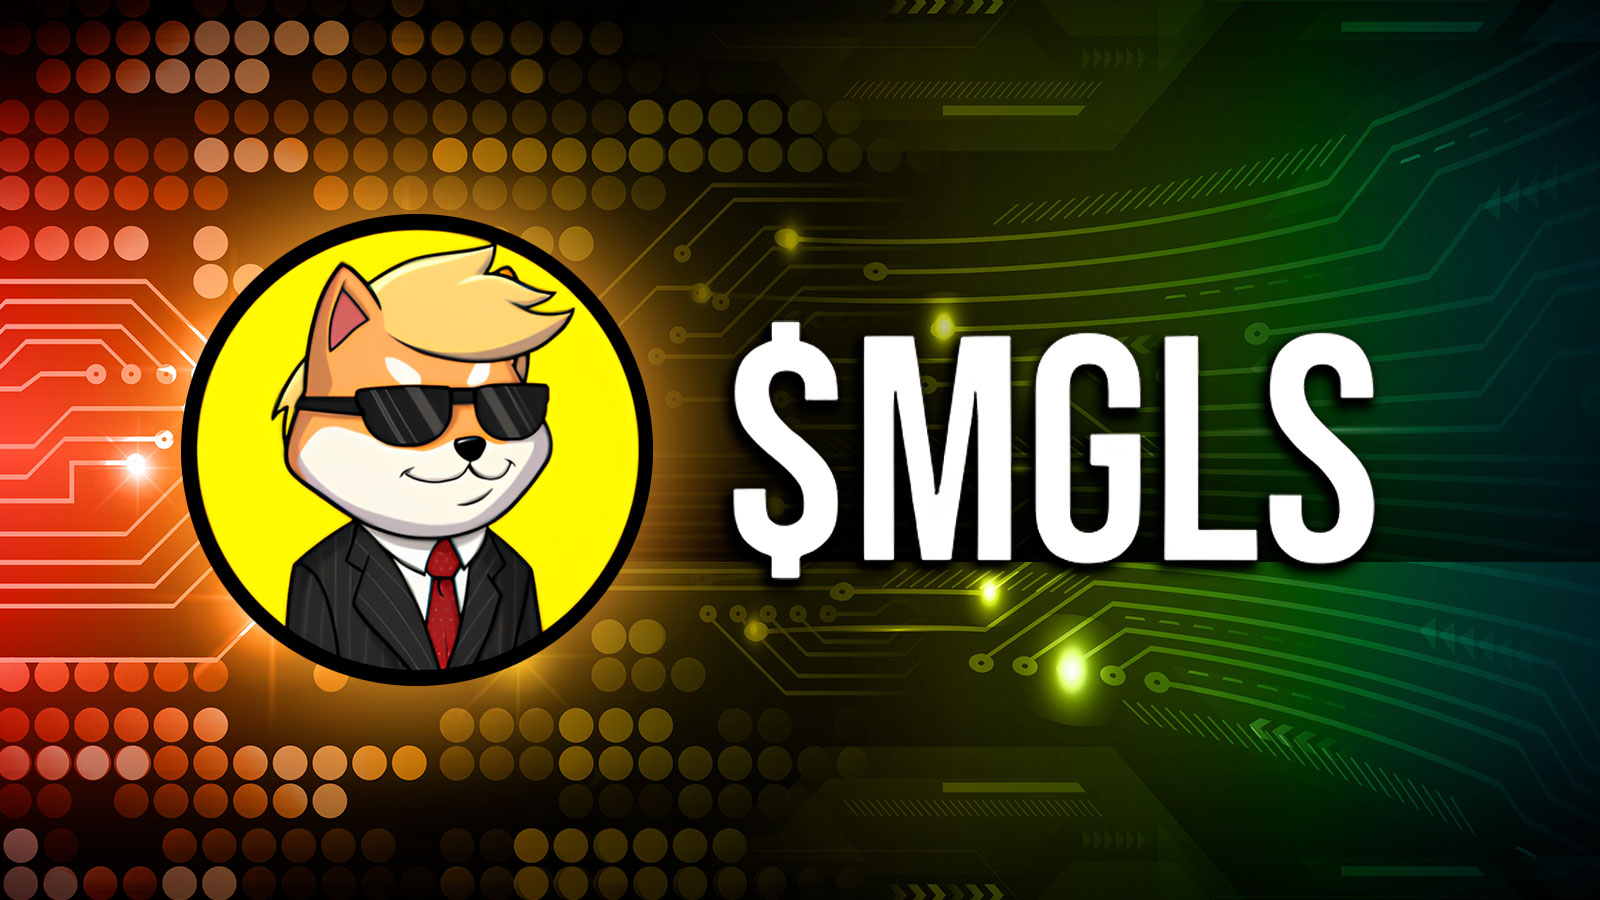 Solana and Dogecoin Show Surprisingly Performance, Meme Moguls (MGLS) Moves Ahead in Presale